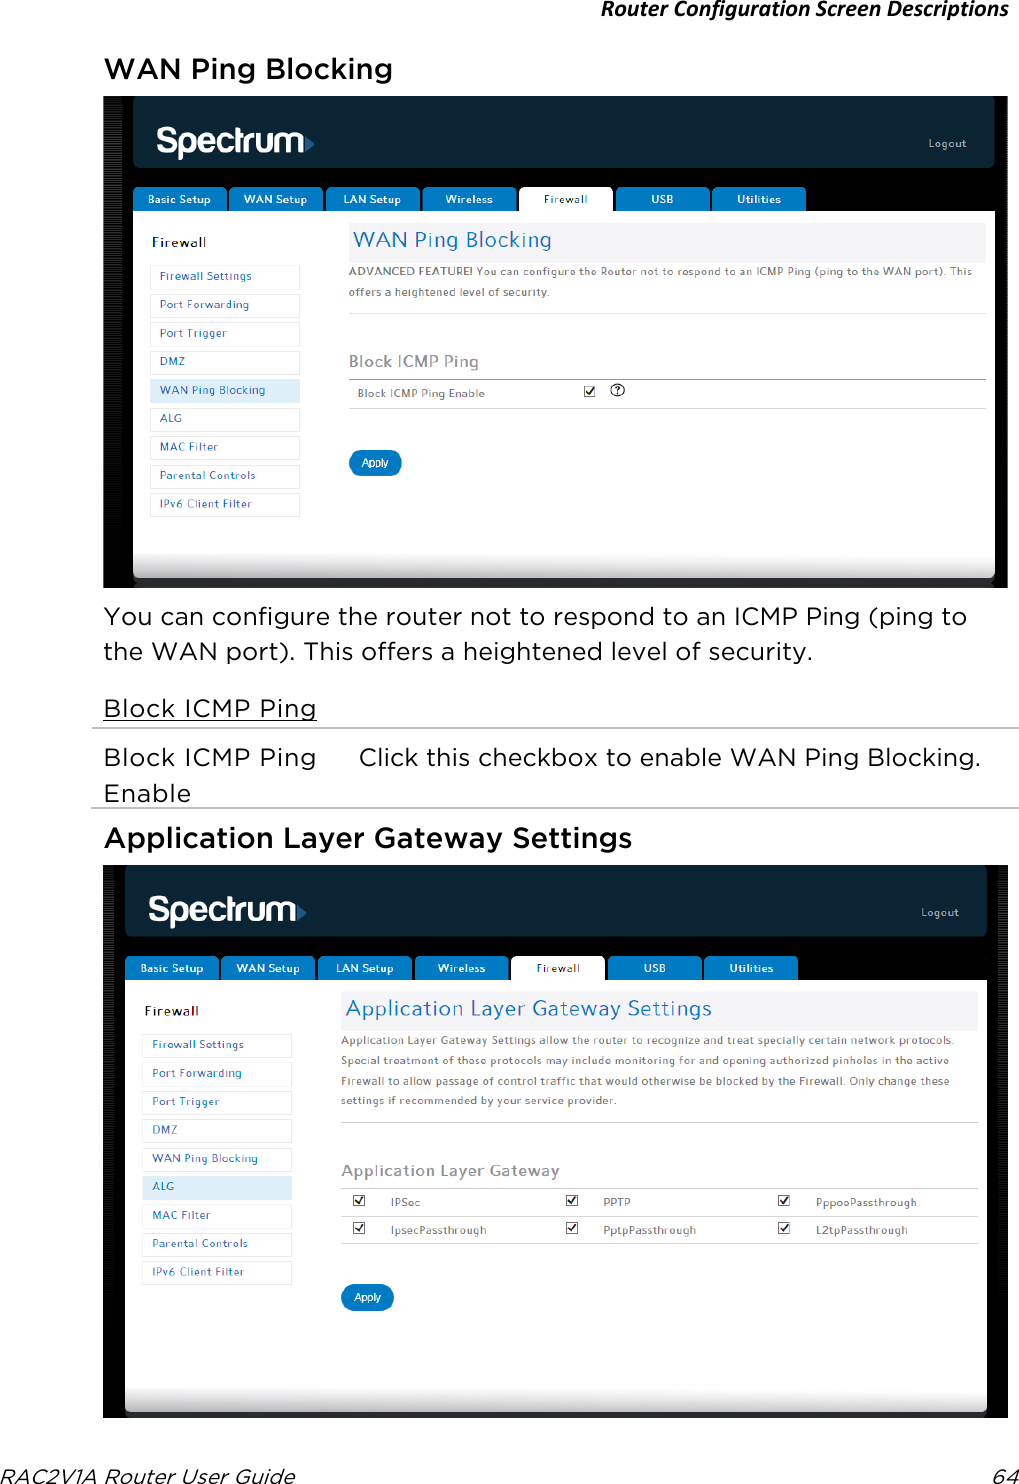 Router Configuration Screen Descriptions  RAC2V1A Router User Guide 64  WAN Ping Blocking  You can configure the router not to respond to an ICMP Ping (ping to the WAN port). This offers a heightened level of security. Block ICMP Ping Block ICMP Ping Enable Click this checkbox to enable WAN Ping Blocking.   Application Layer Gateway Settings  